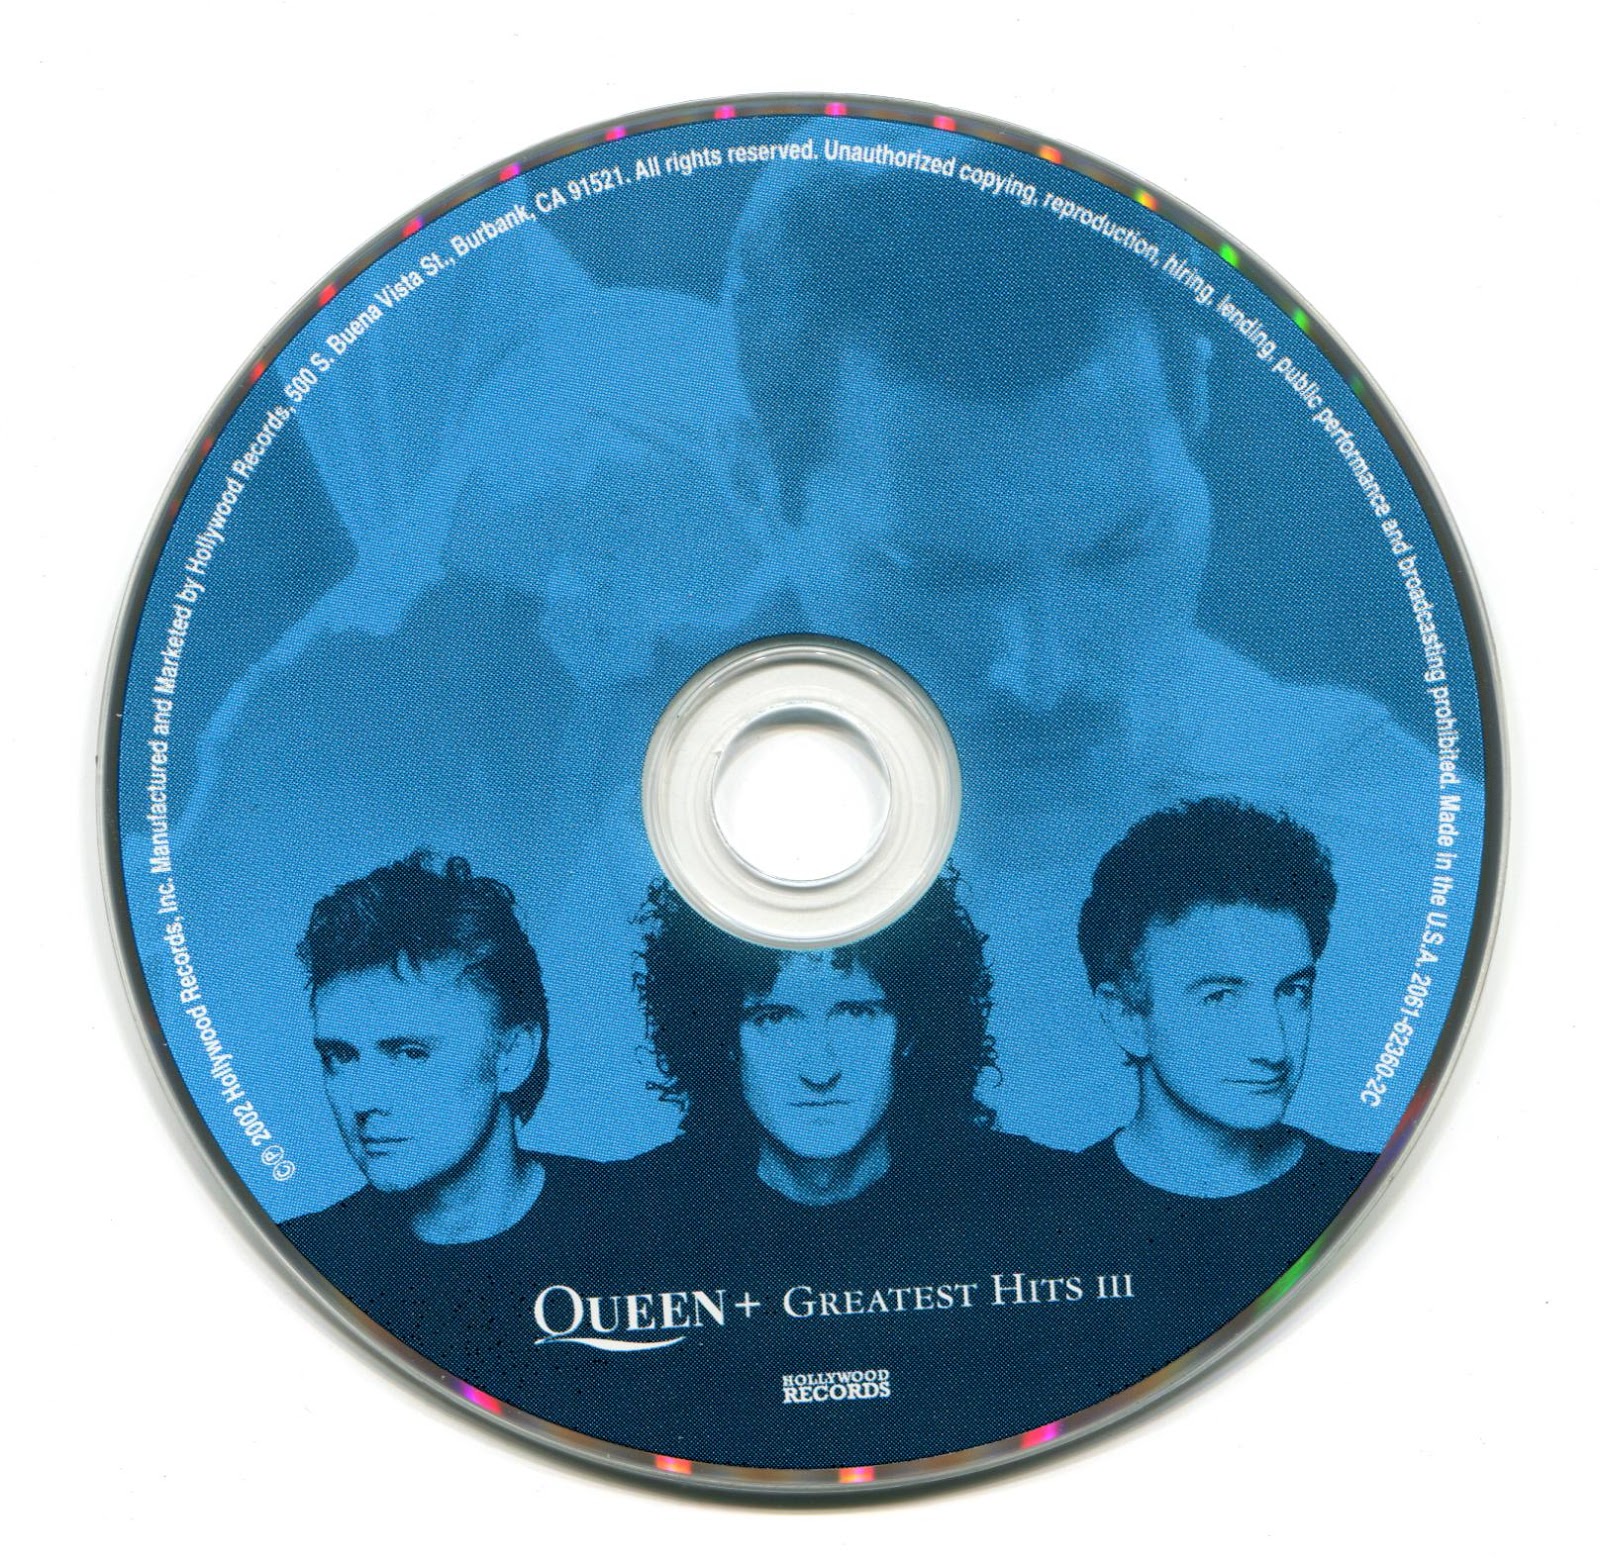 Greatest hits collection. Queen Greatest Hits 1981. "The Greatest Hits" Queen Касетта обложка. Квин 1999. Queen Greatest Hits 1 2 3 Platinum collection.